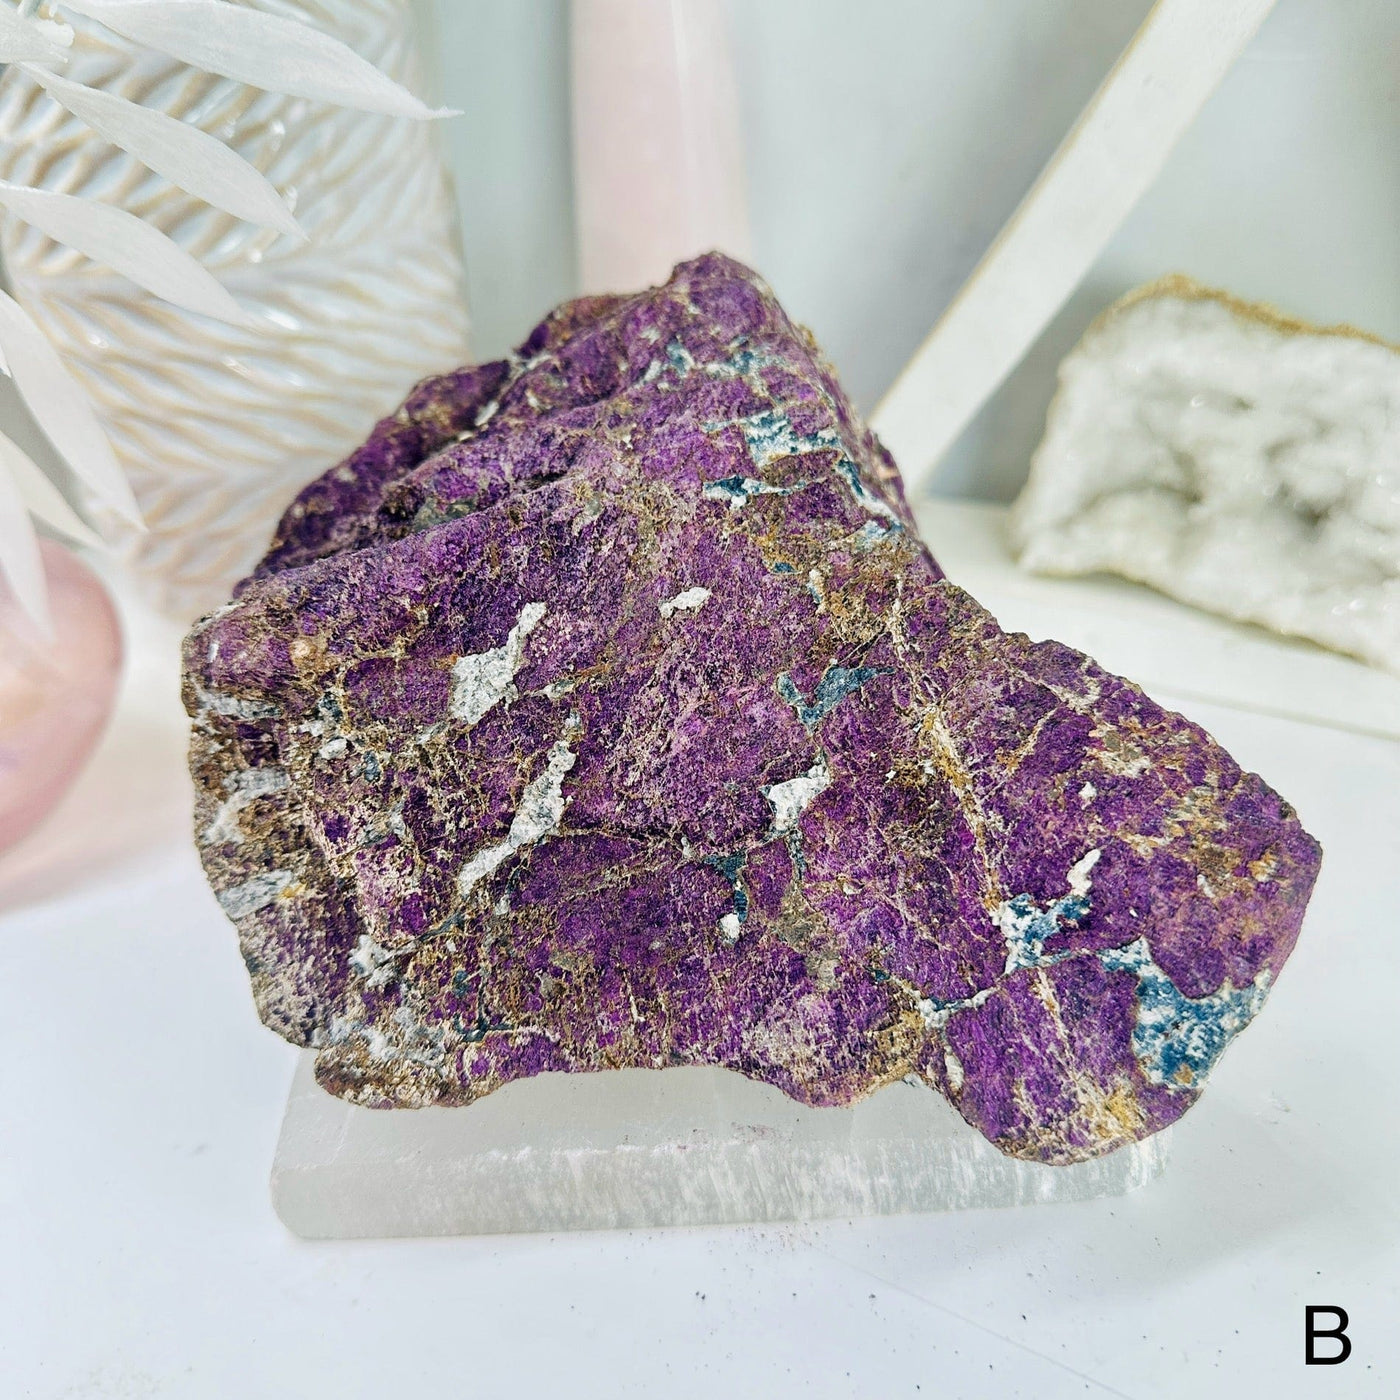 Purpurite Crystal - Rough Stone - YOU CHOOSE variant B labeled